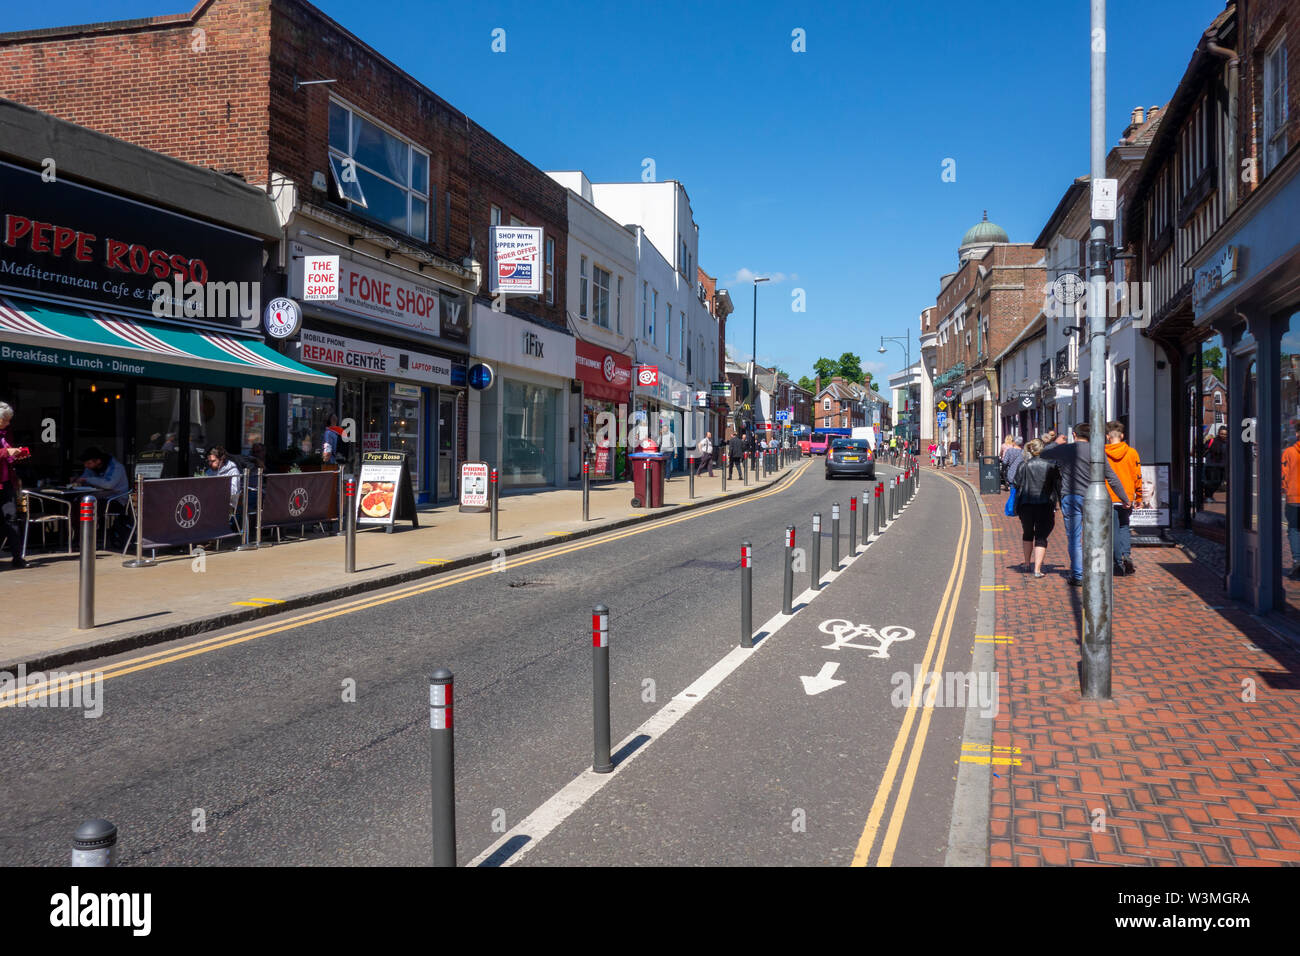 Cycle lane, road, cars and shops on High Street, Watford, Hertfordshire, UK Stock Photo